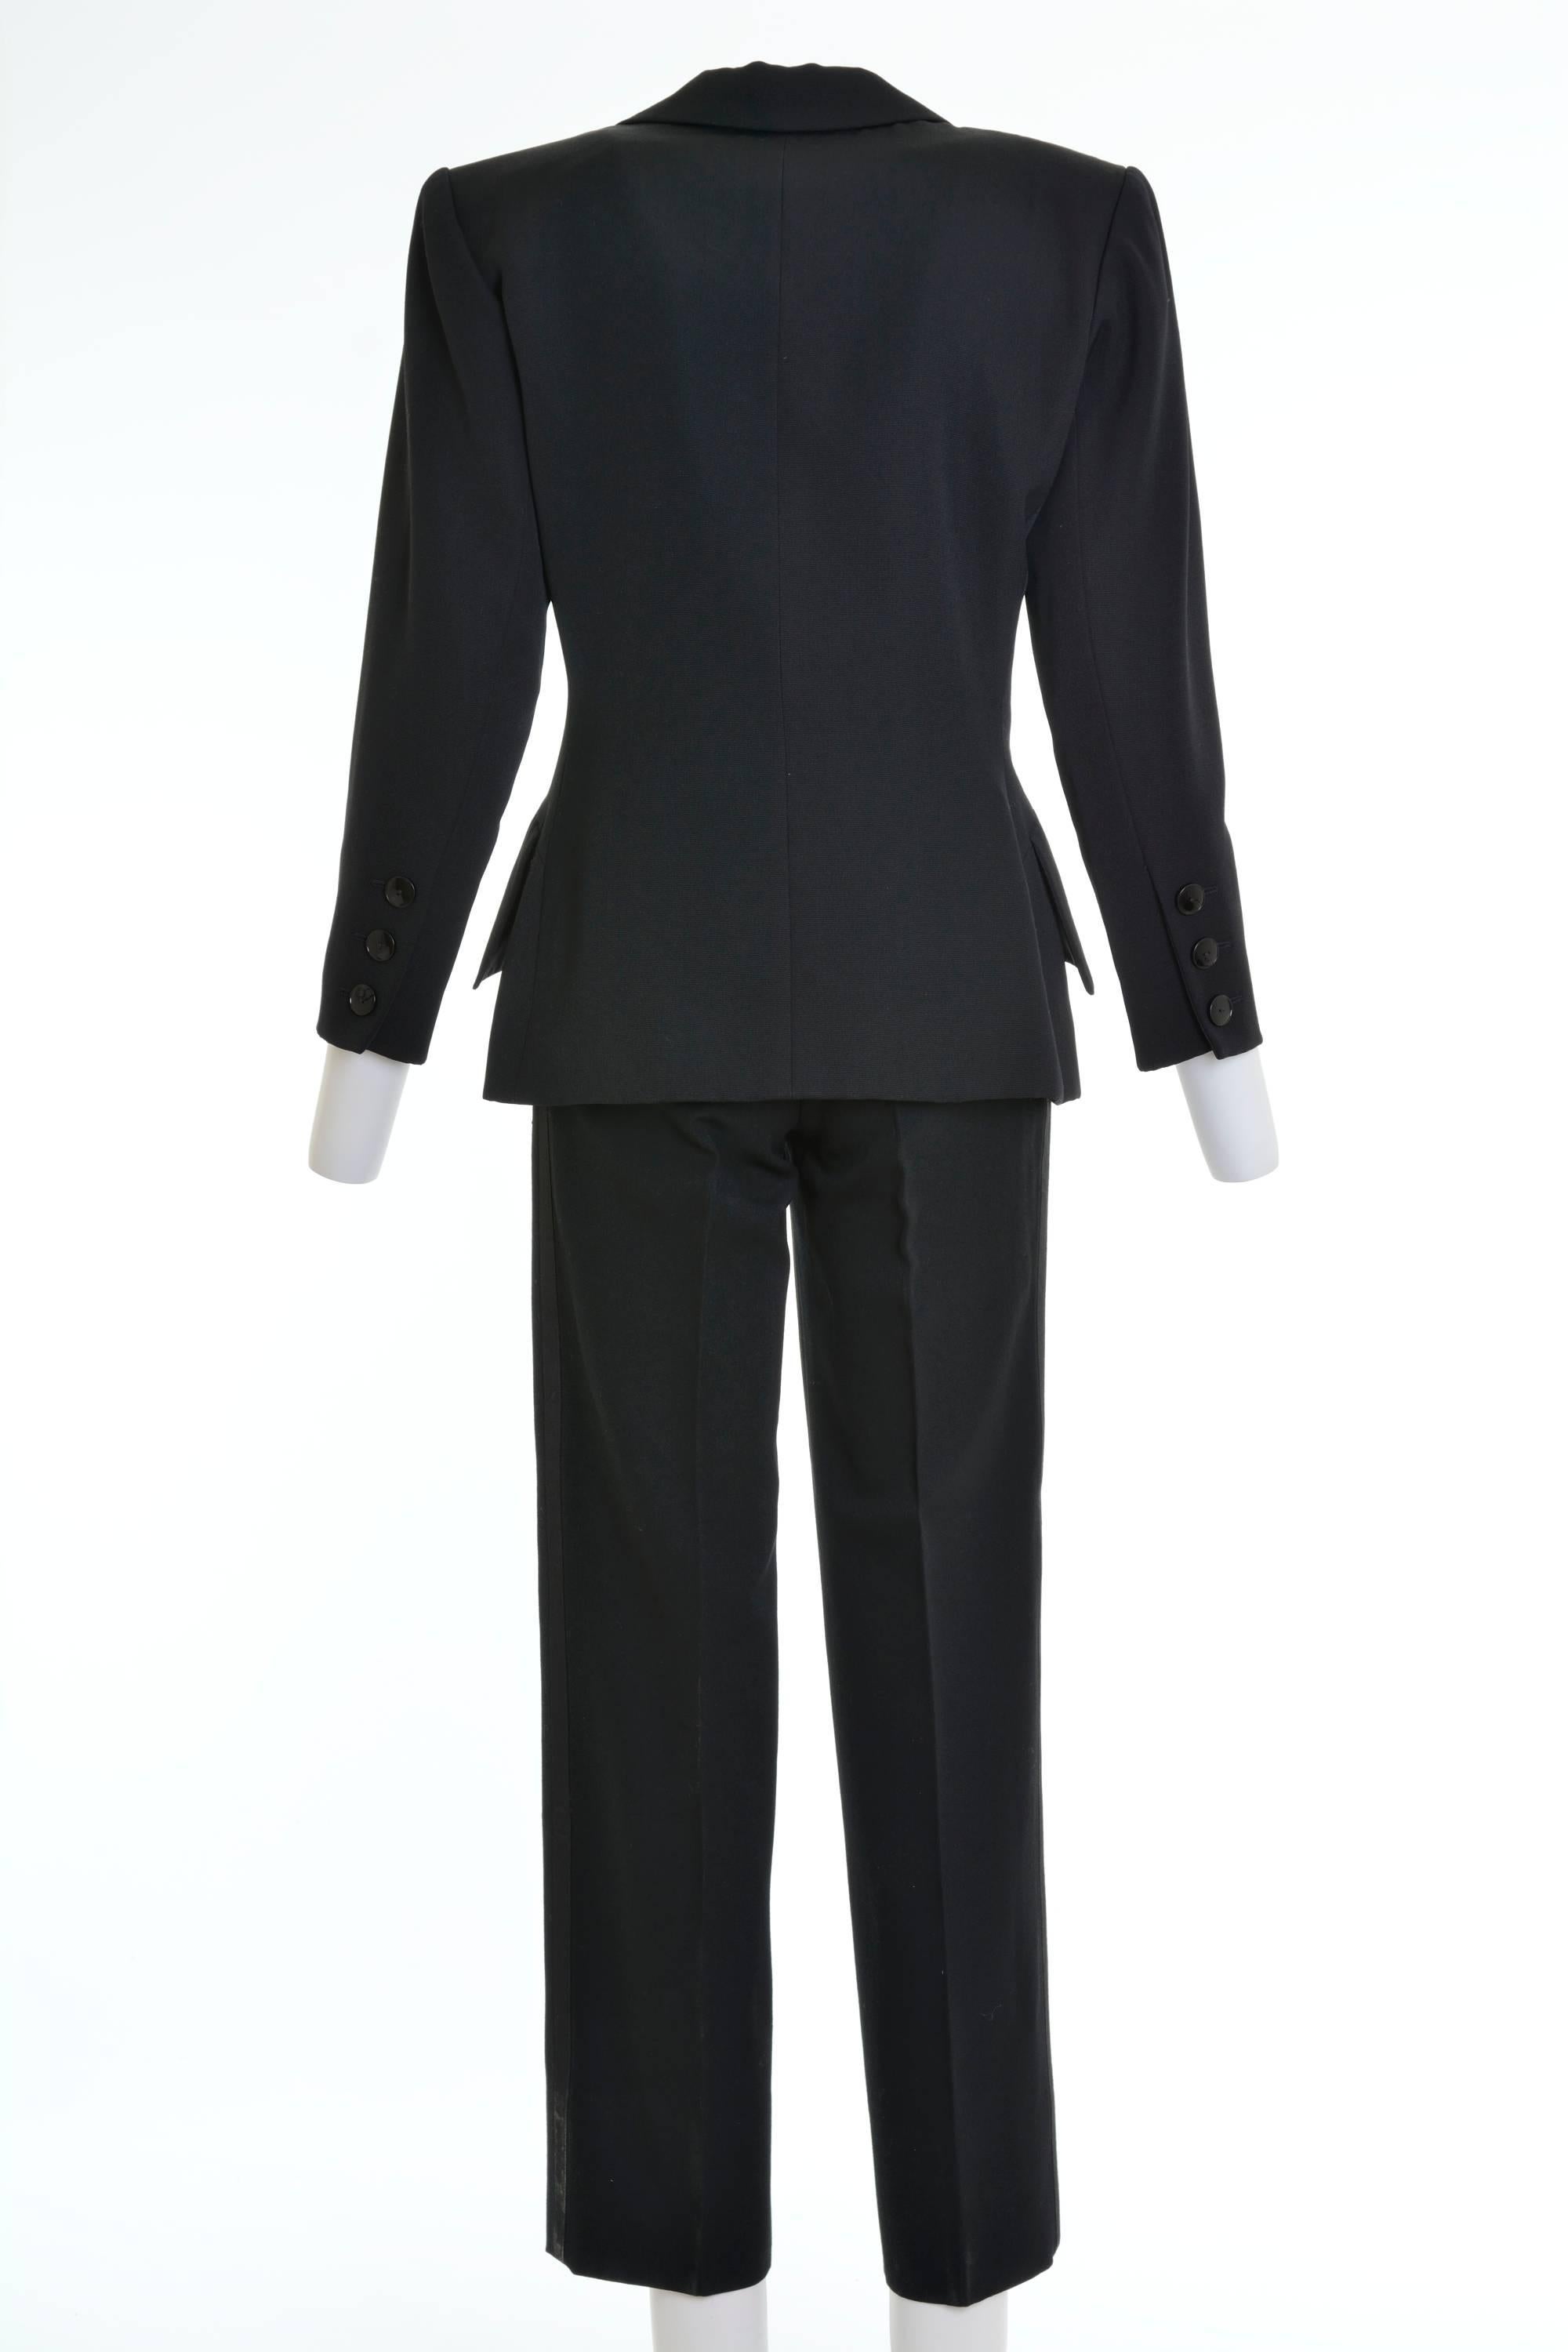 Tuxedo jacket, two jetted pockets with flap, one welt left pocket, plain cuff, two spare buttons in the inside, polyester satin revers opening tuxedo pants, front and back pleats, side pockets.
It has a lot of fabric in the hem of the pants, to be